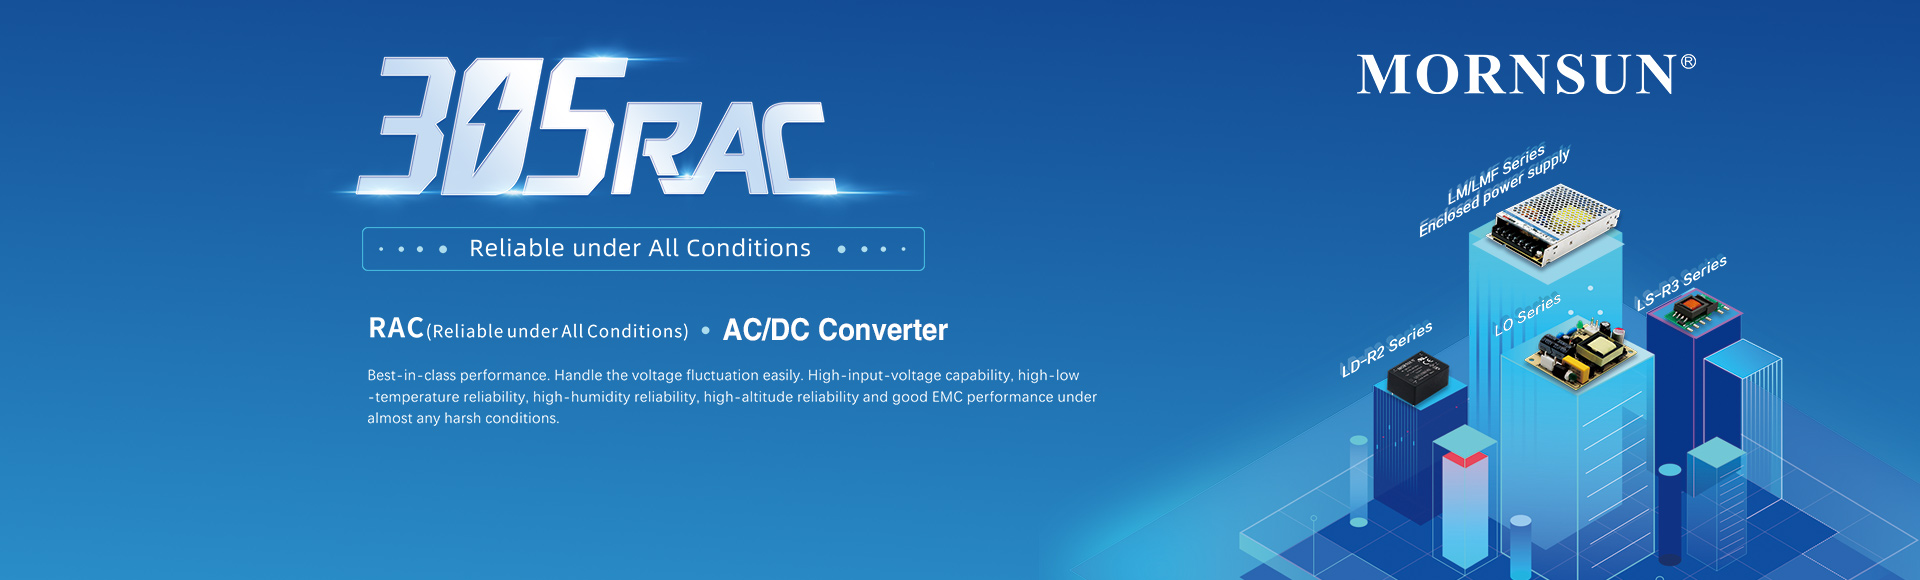 All You Should Know About AC/DC Converters - Mornsun